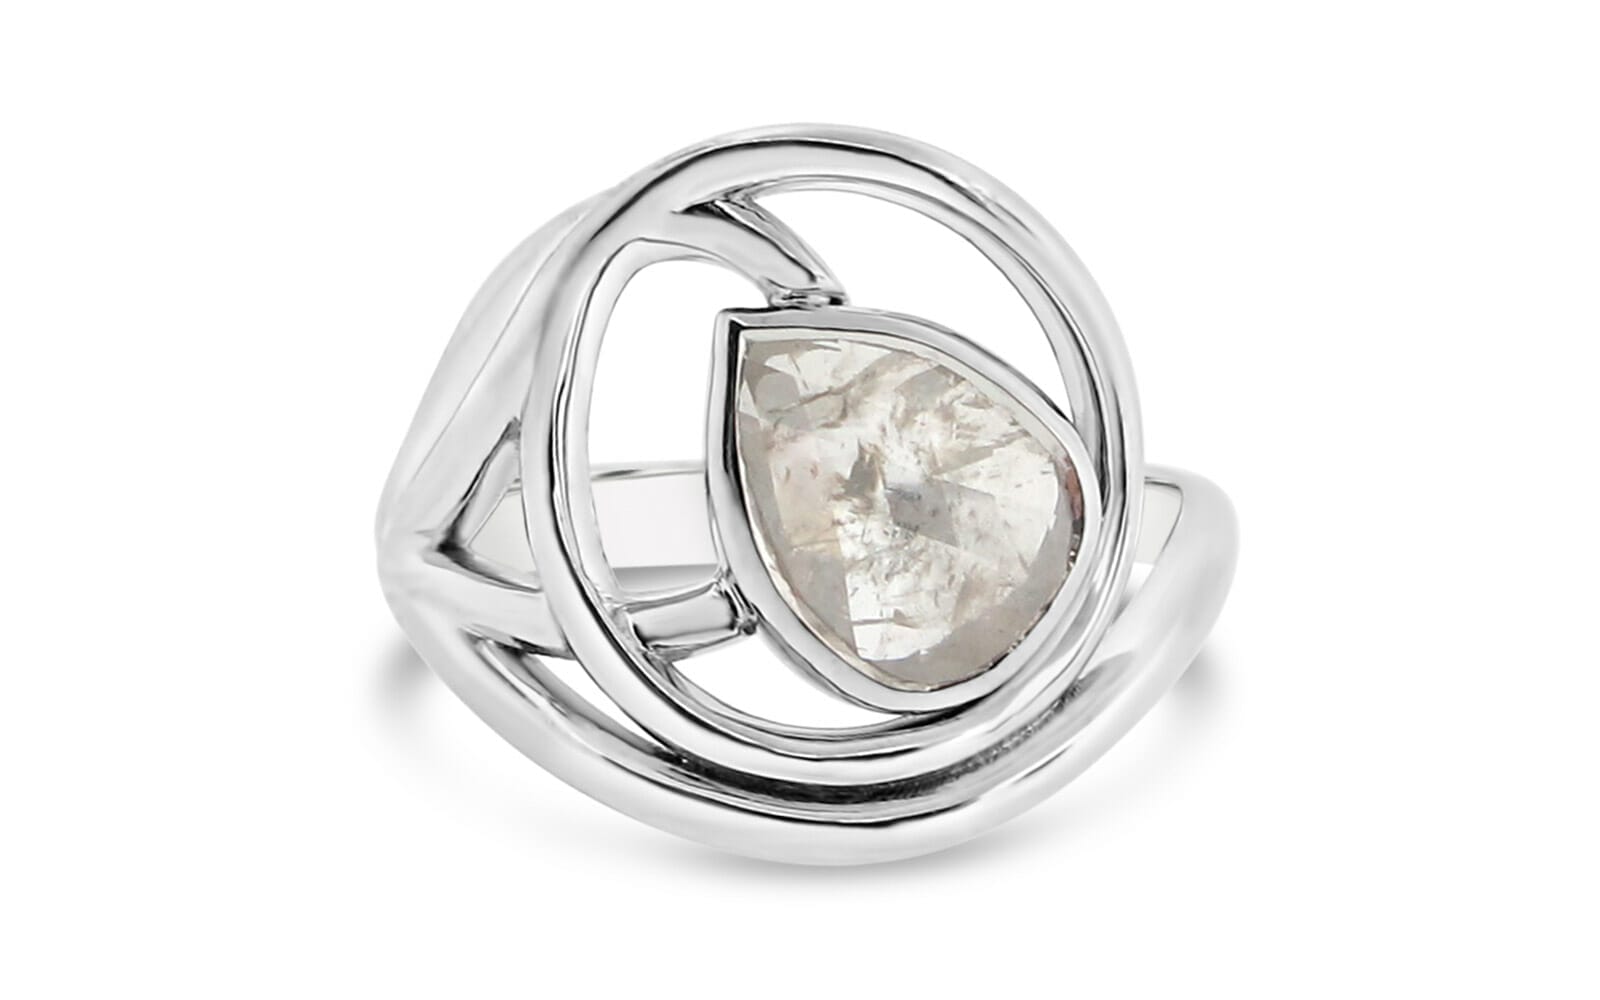 White Gold Round Geometric Ring with a Pear shaped Diamond